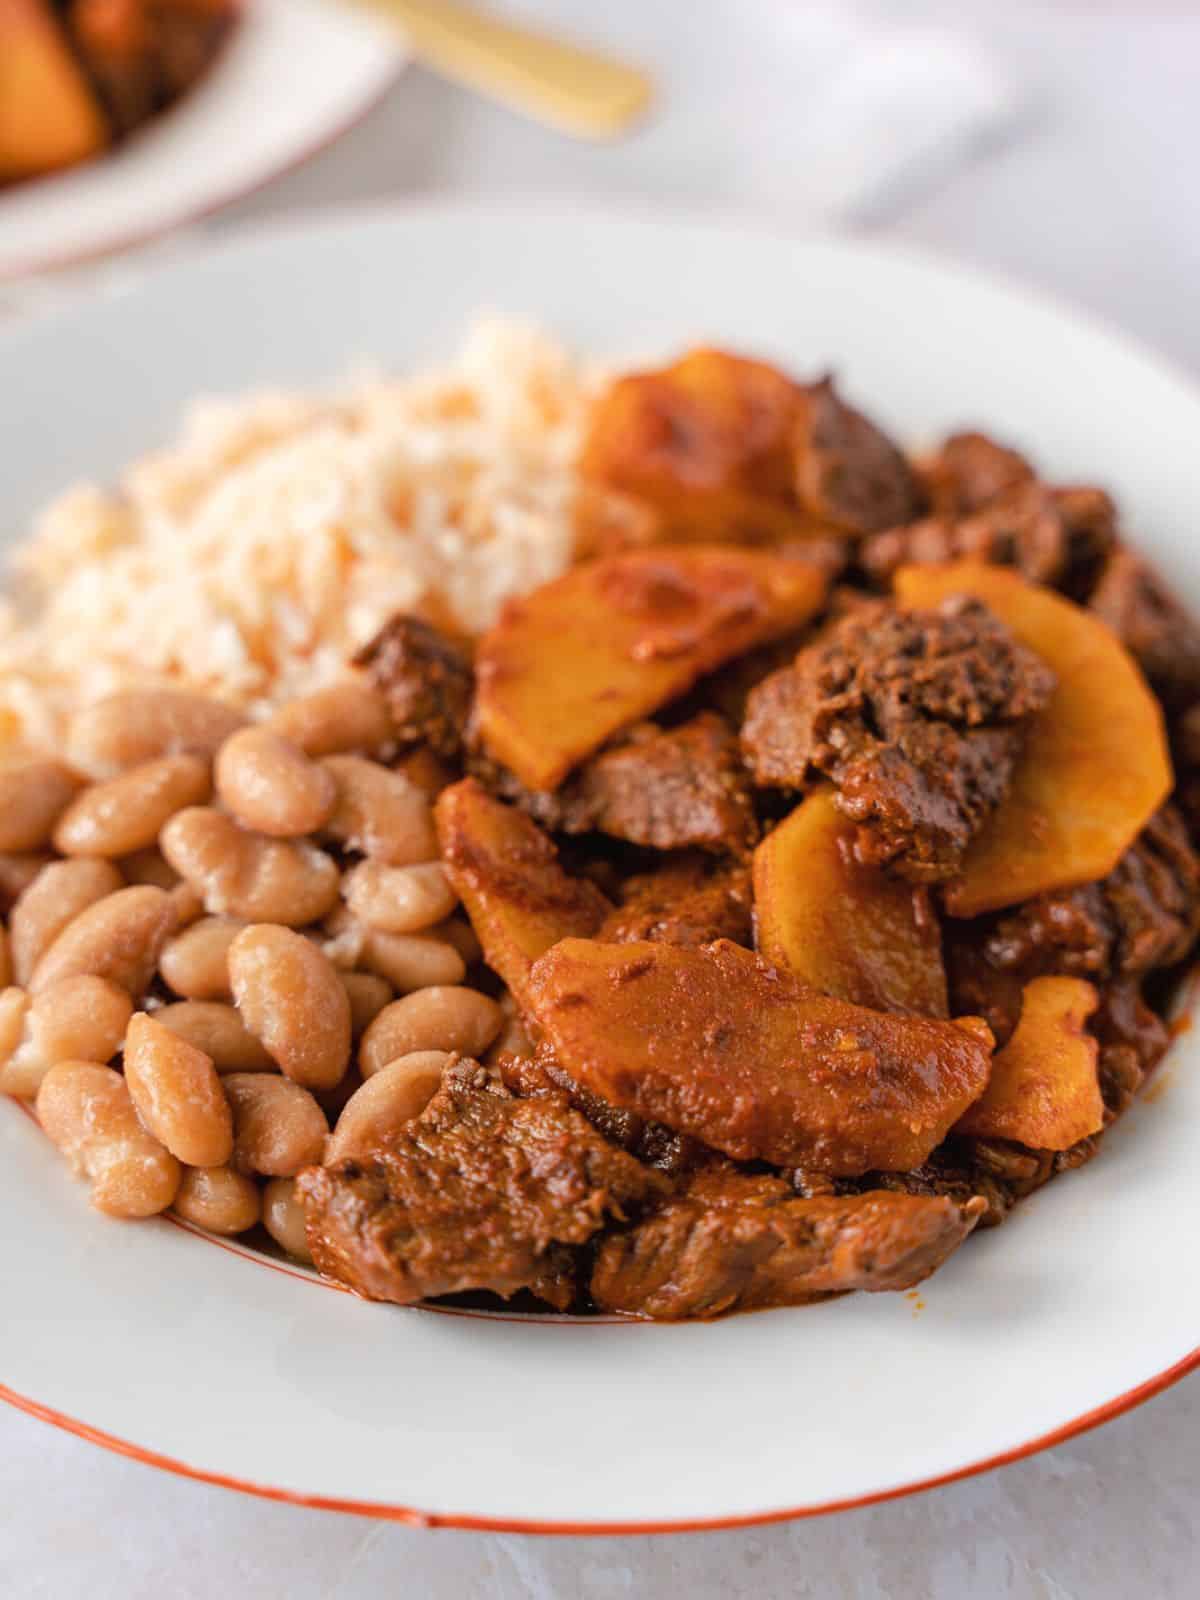 Beef and potatoes on a plate with rice and beans.